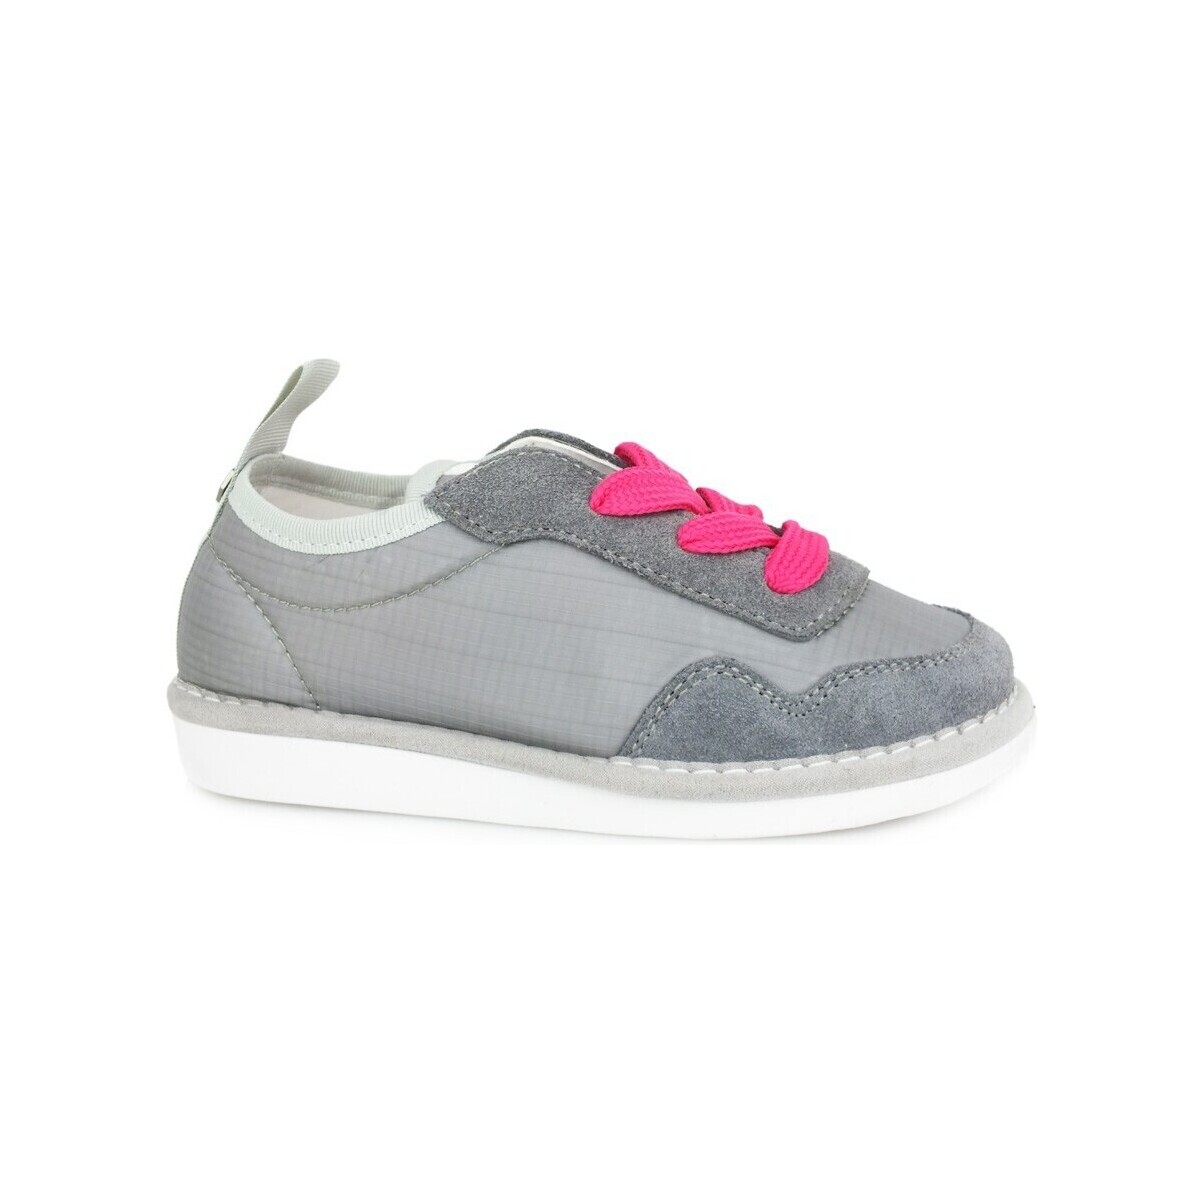 Chaussures Multisport Panchic Melone Ash Fuxia A00054 Gris